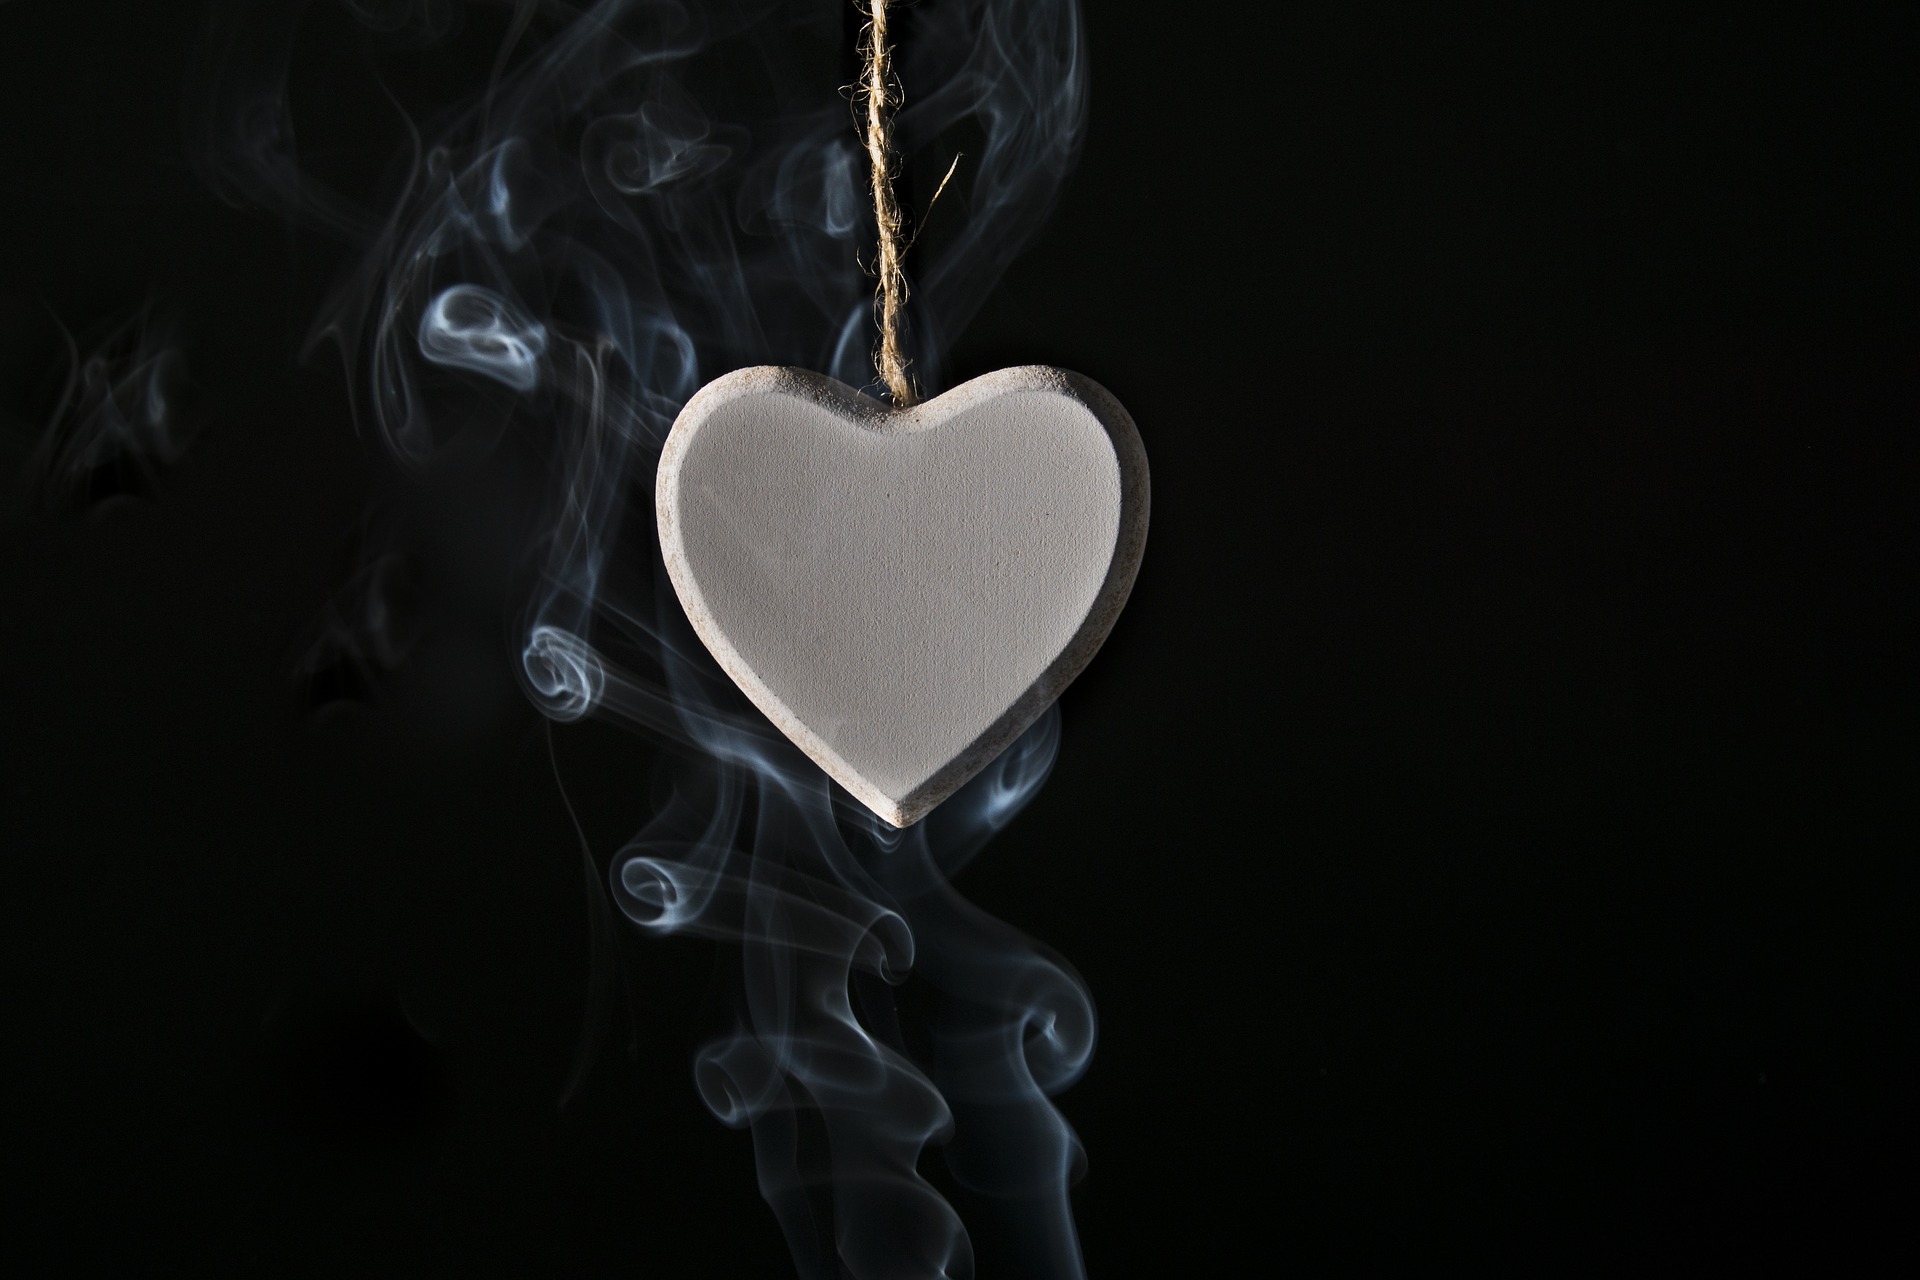 smoke curling around a heart ornament